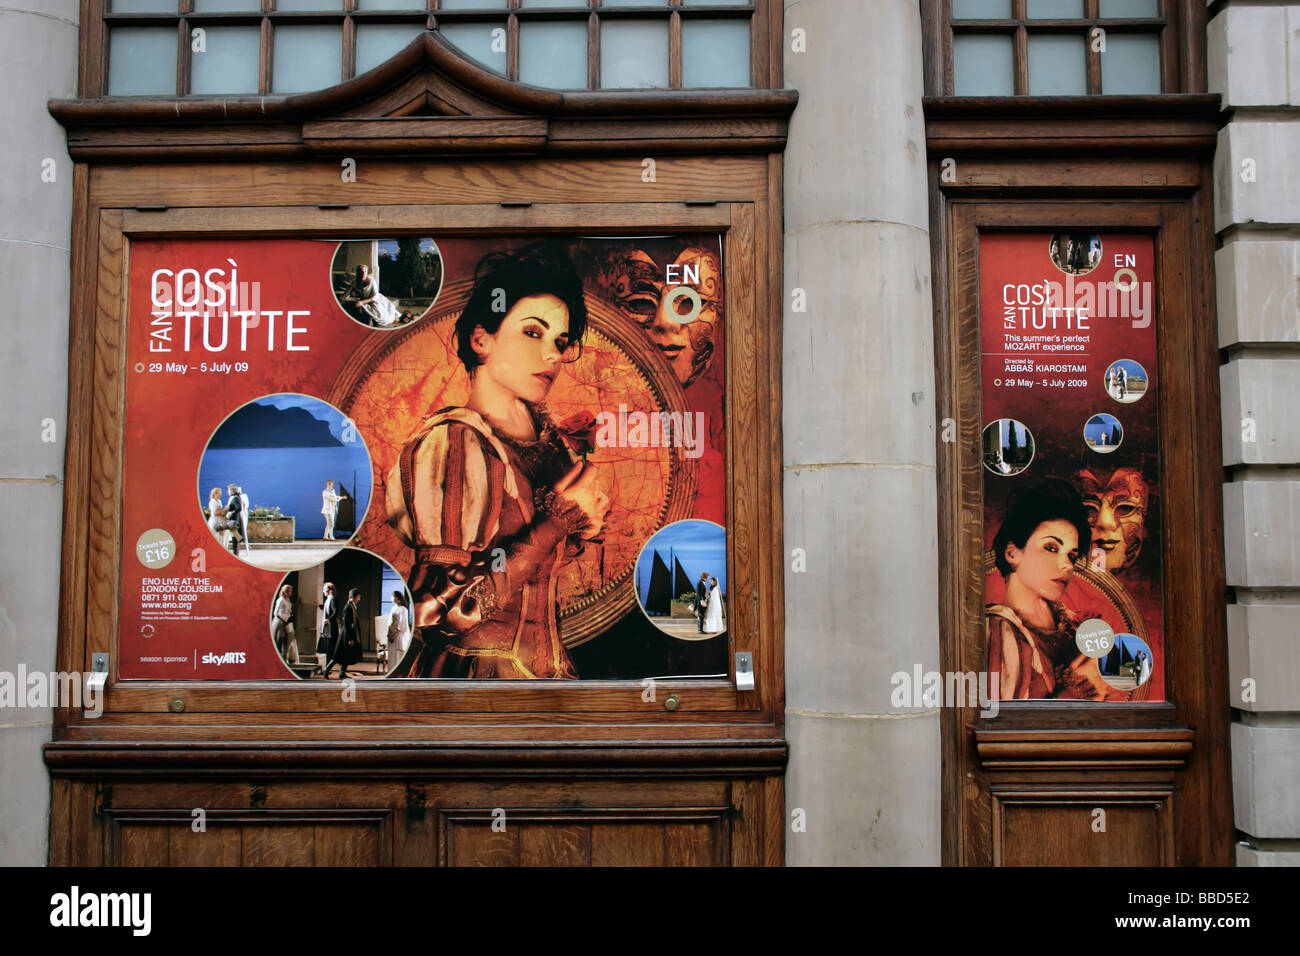 Posters for English National Opera's Cosi fan tutte at the London Coliseum, 2009 Stock Photo